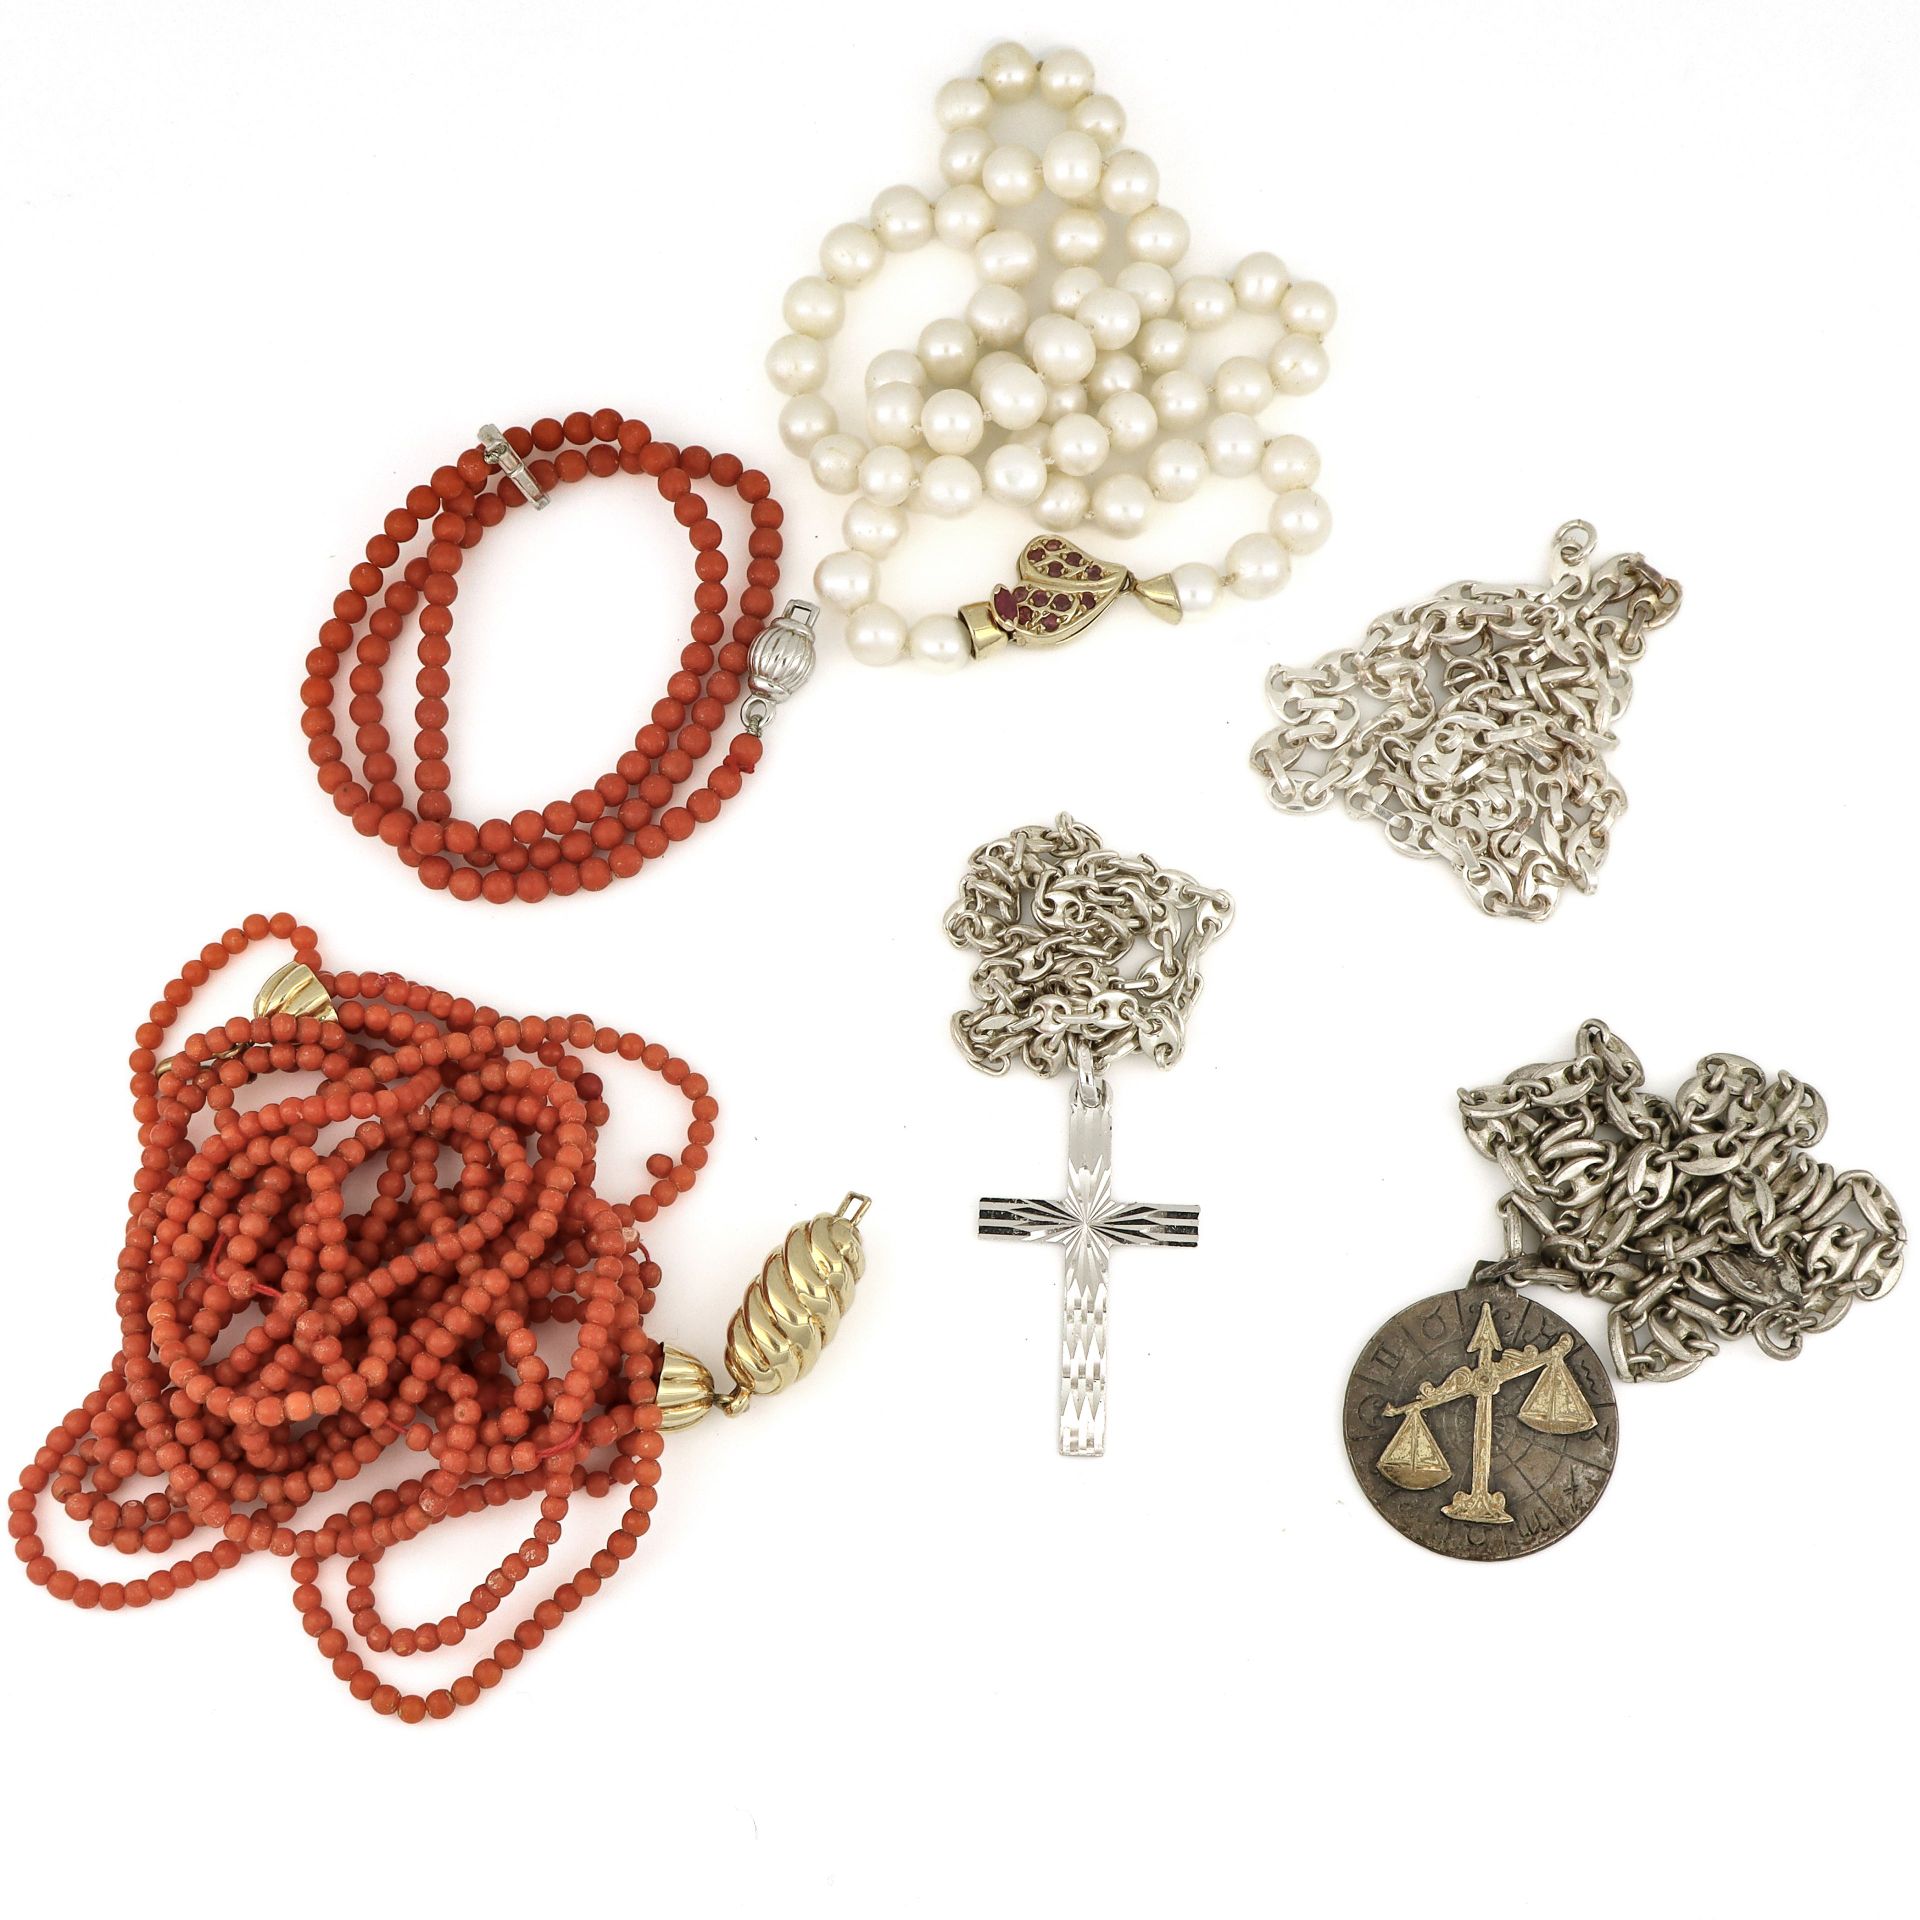 Null Lot consisting of 4 necklaces with pearls, coral, silver.